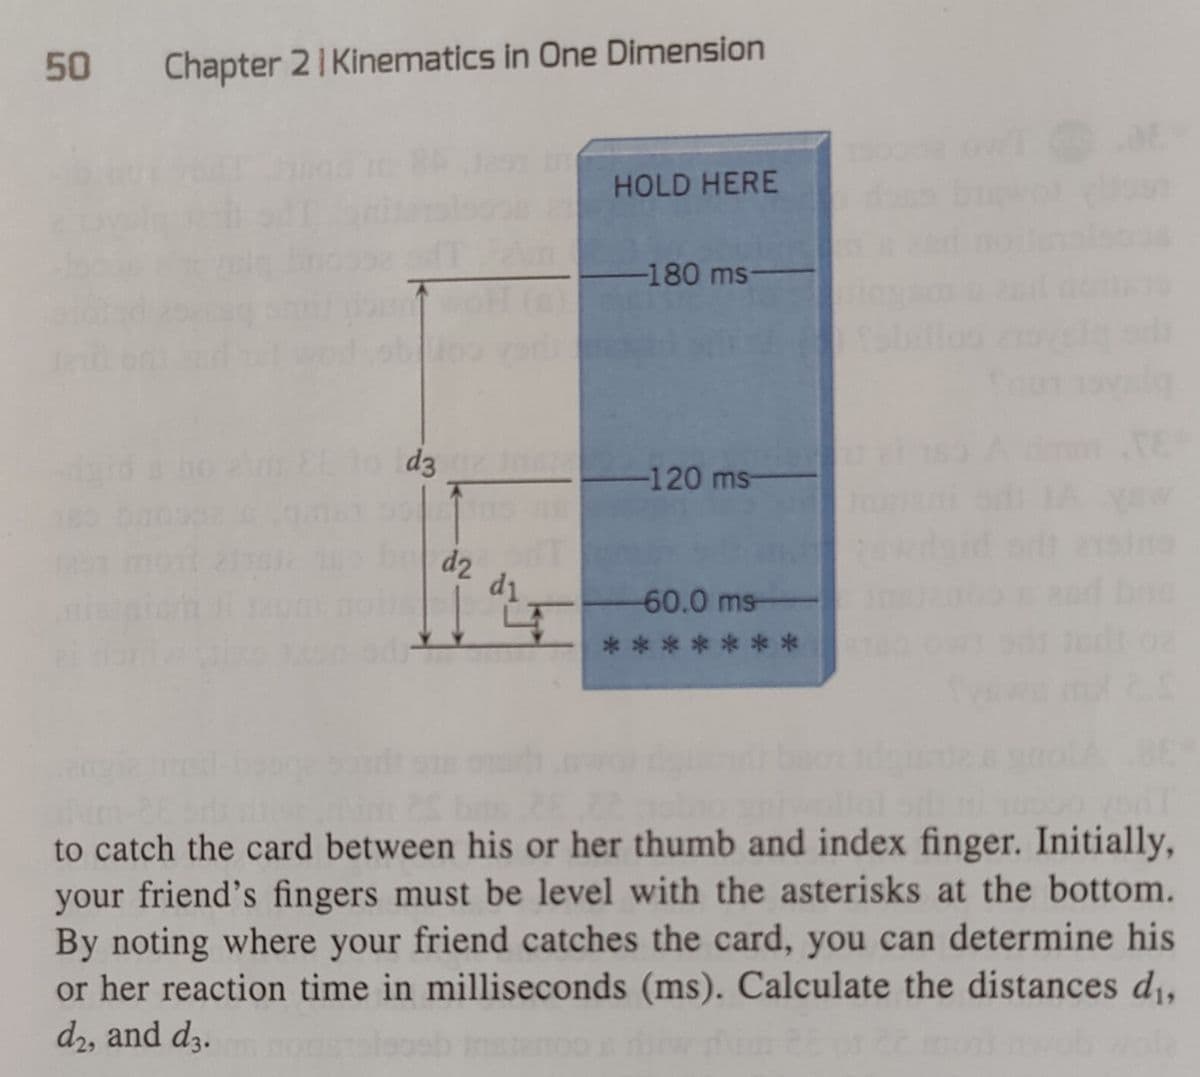 50 Chapter 21 Kinematics in One Dimension
d3
d2
d₁
HOLD HERE
-180 ms
-120 ms
60.0 ms
**
to catch the card between his or her thumb and index finger. Initially,
your friend's fingers must be level with the asterisks at the bottom.
By noting where your friend catches the card, you can determine his
or her reaction time in milliseconds (ms). Calculate the distances d₁,
d2, and d3.